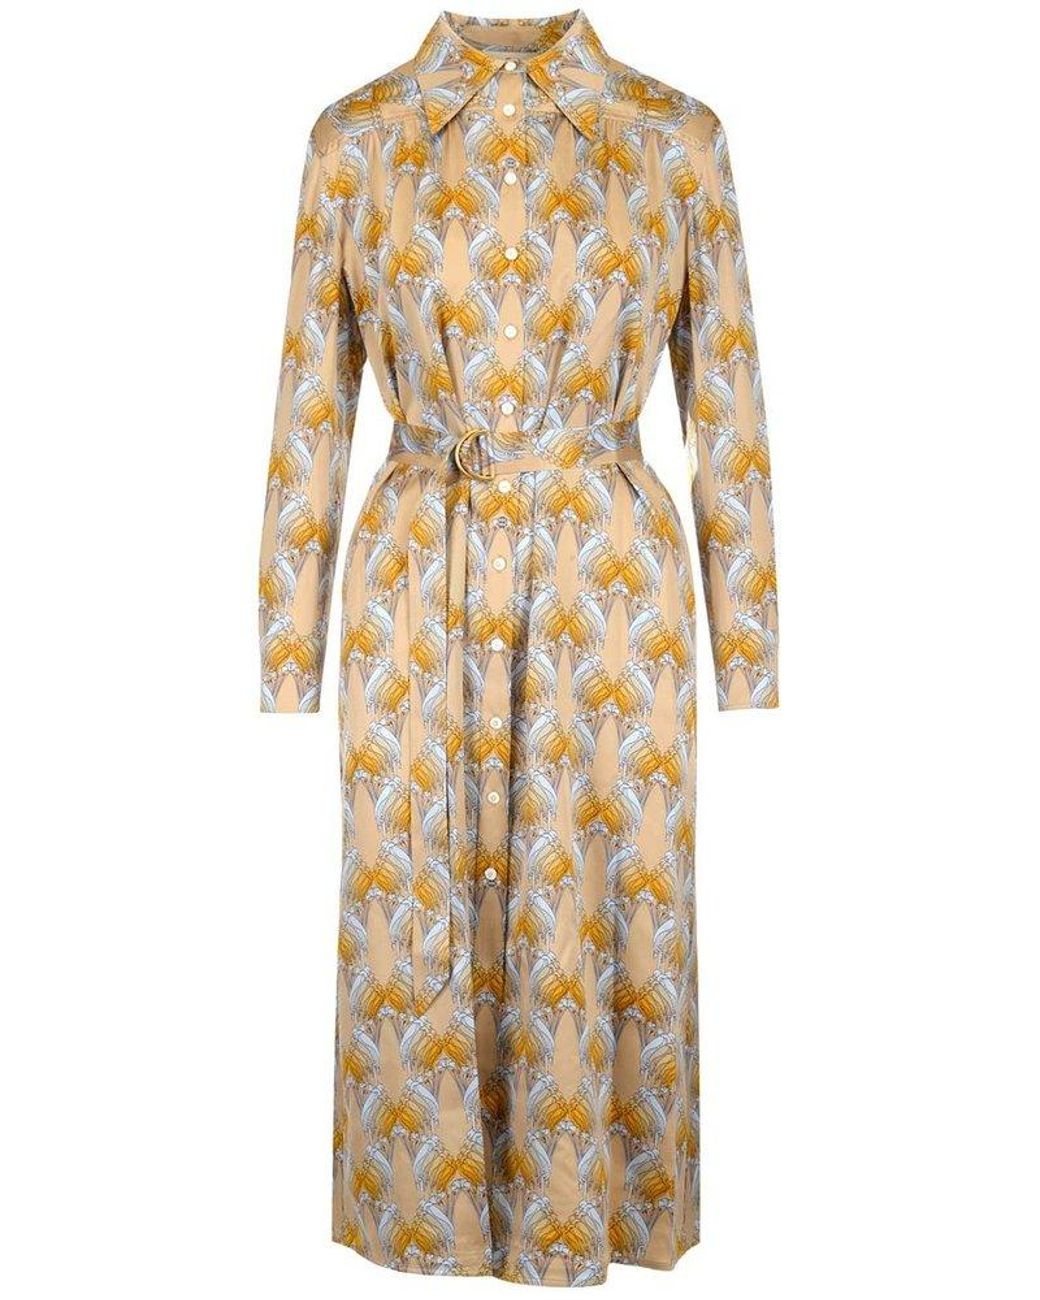 Tory Burch Silk Allover Graphic Print Belted Dress | Lyst